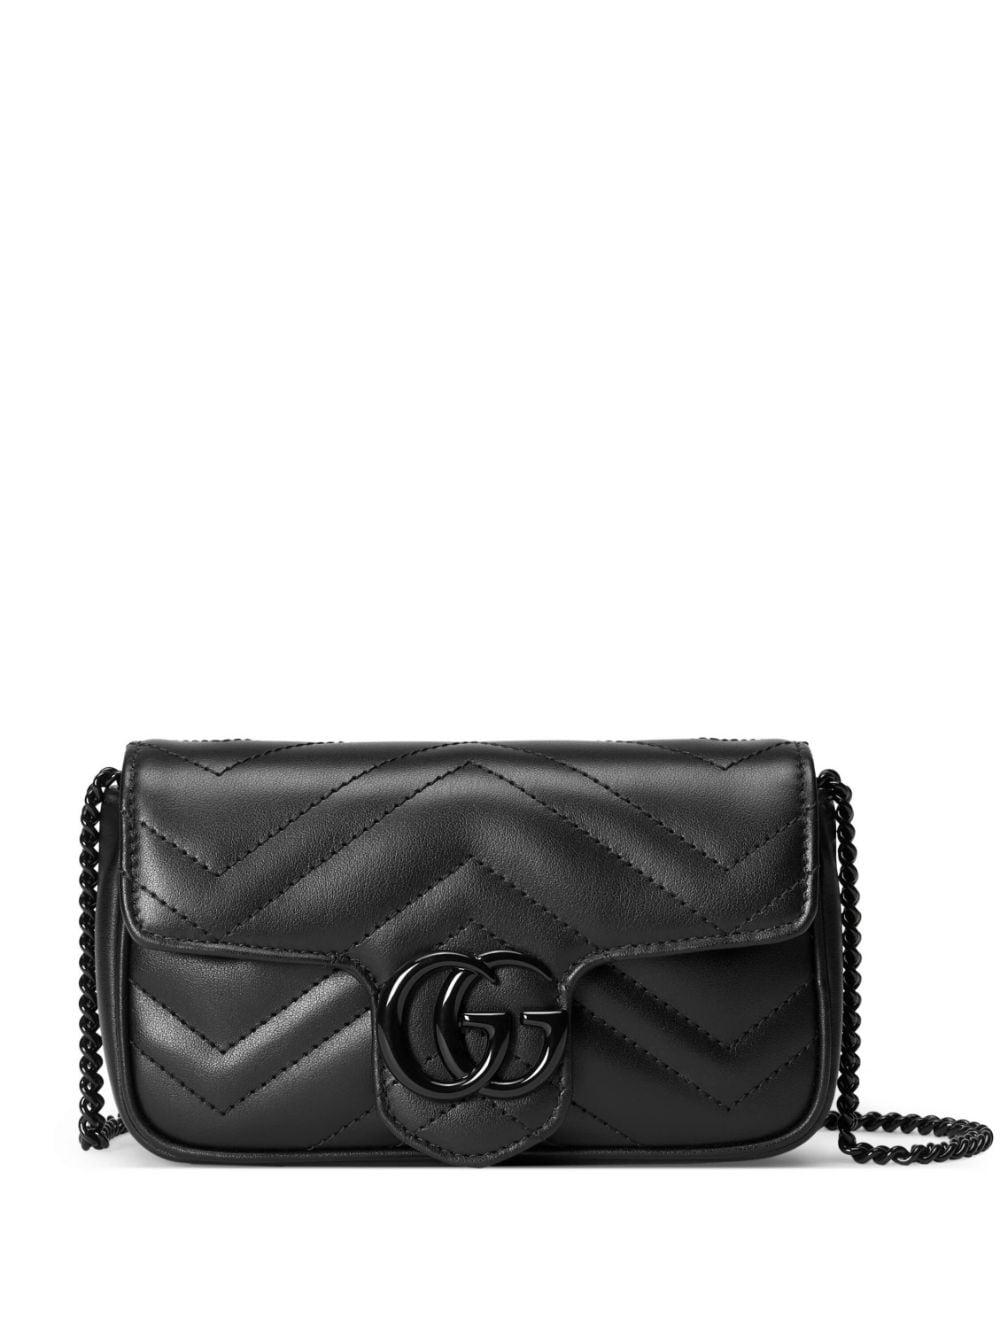 Gucci GG Marmont Leather Mini Bag in Black | Lyst